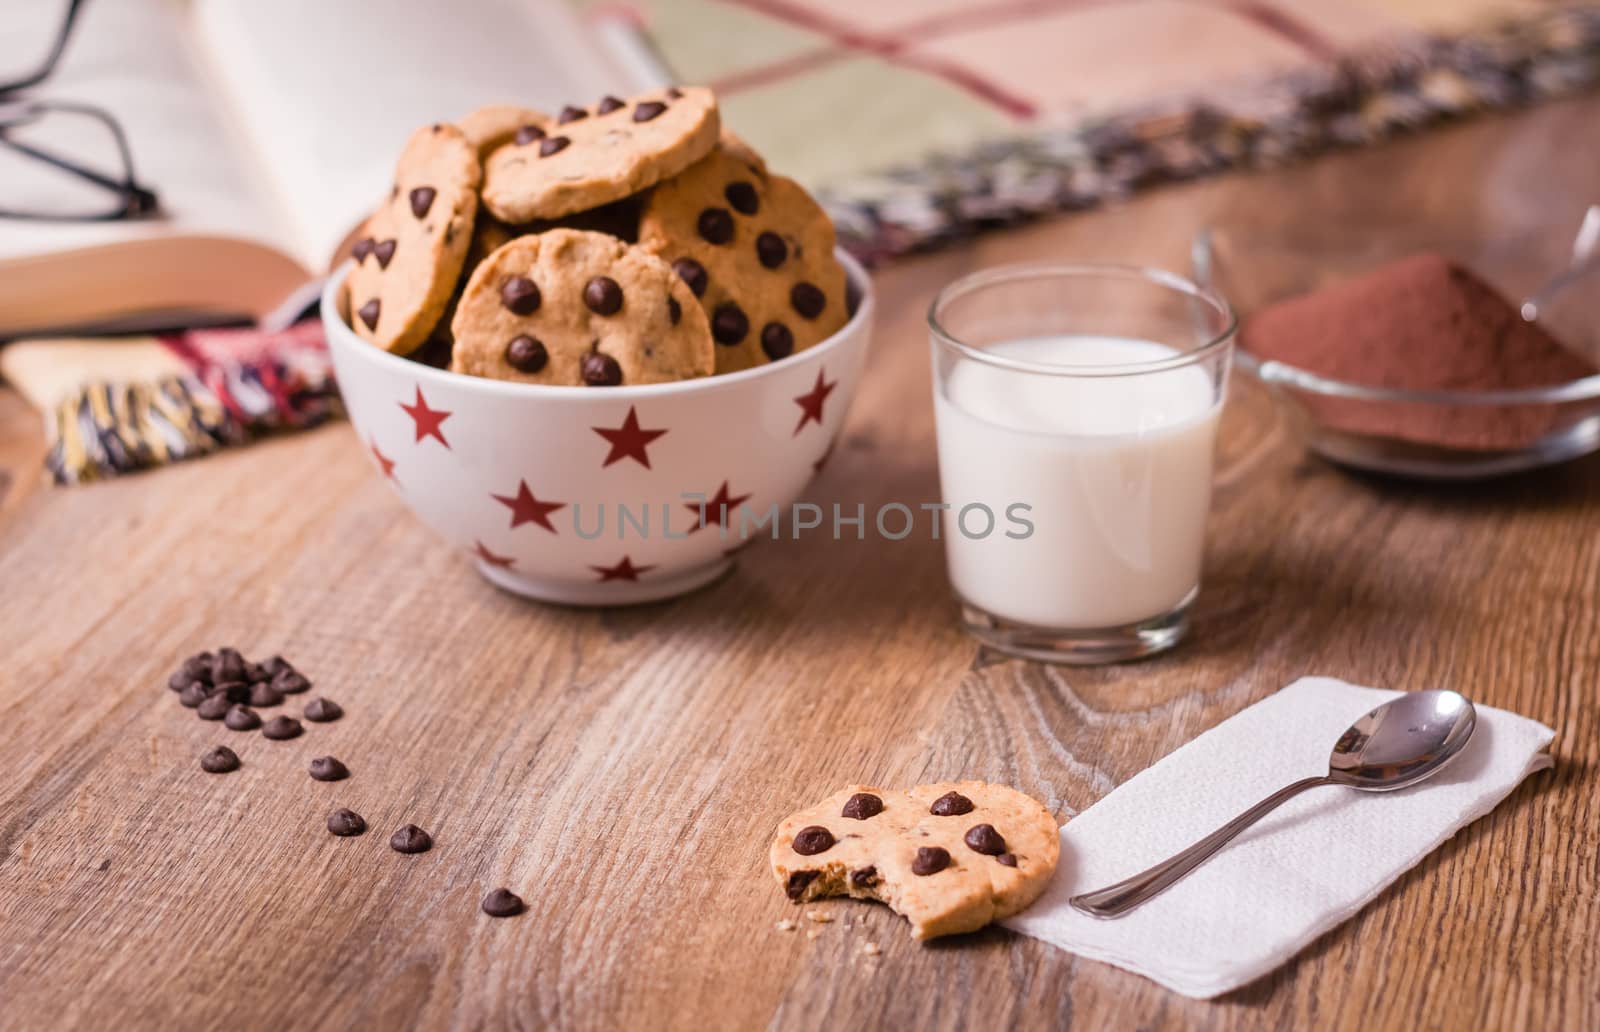 Chocolate chip cookies and milk on wood background by doble.d